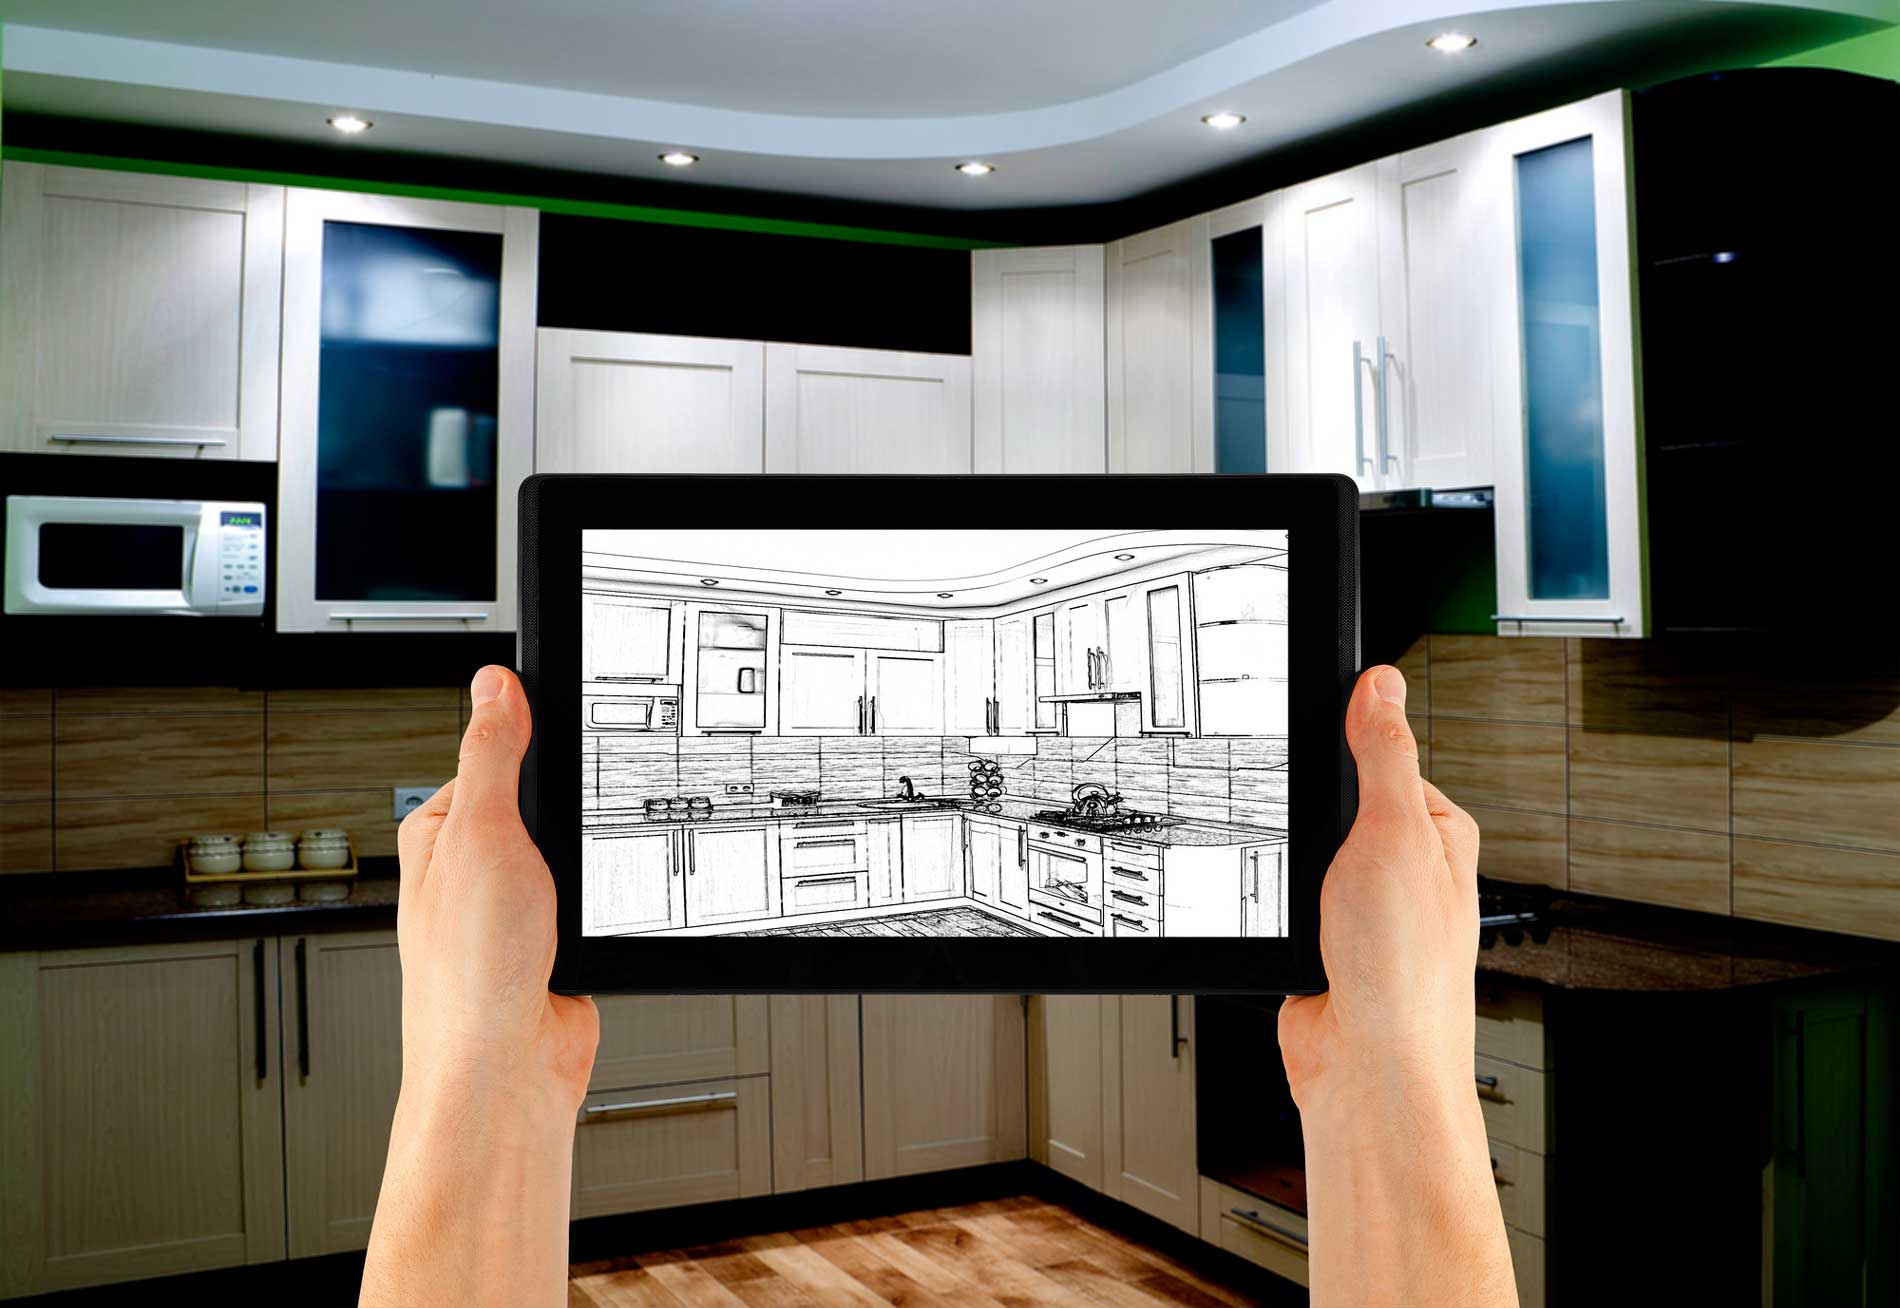 The 20 Best Kitchen Remodeling Apps to Get Ideas   Kitchen & More